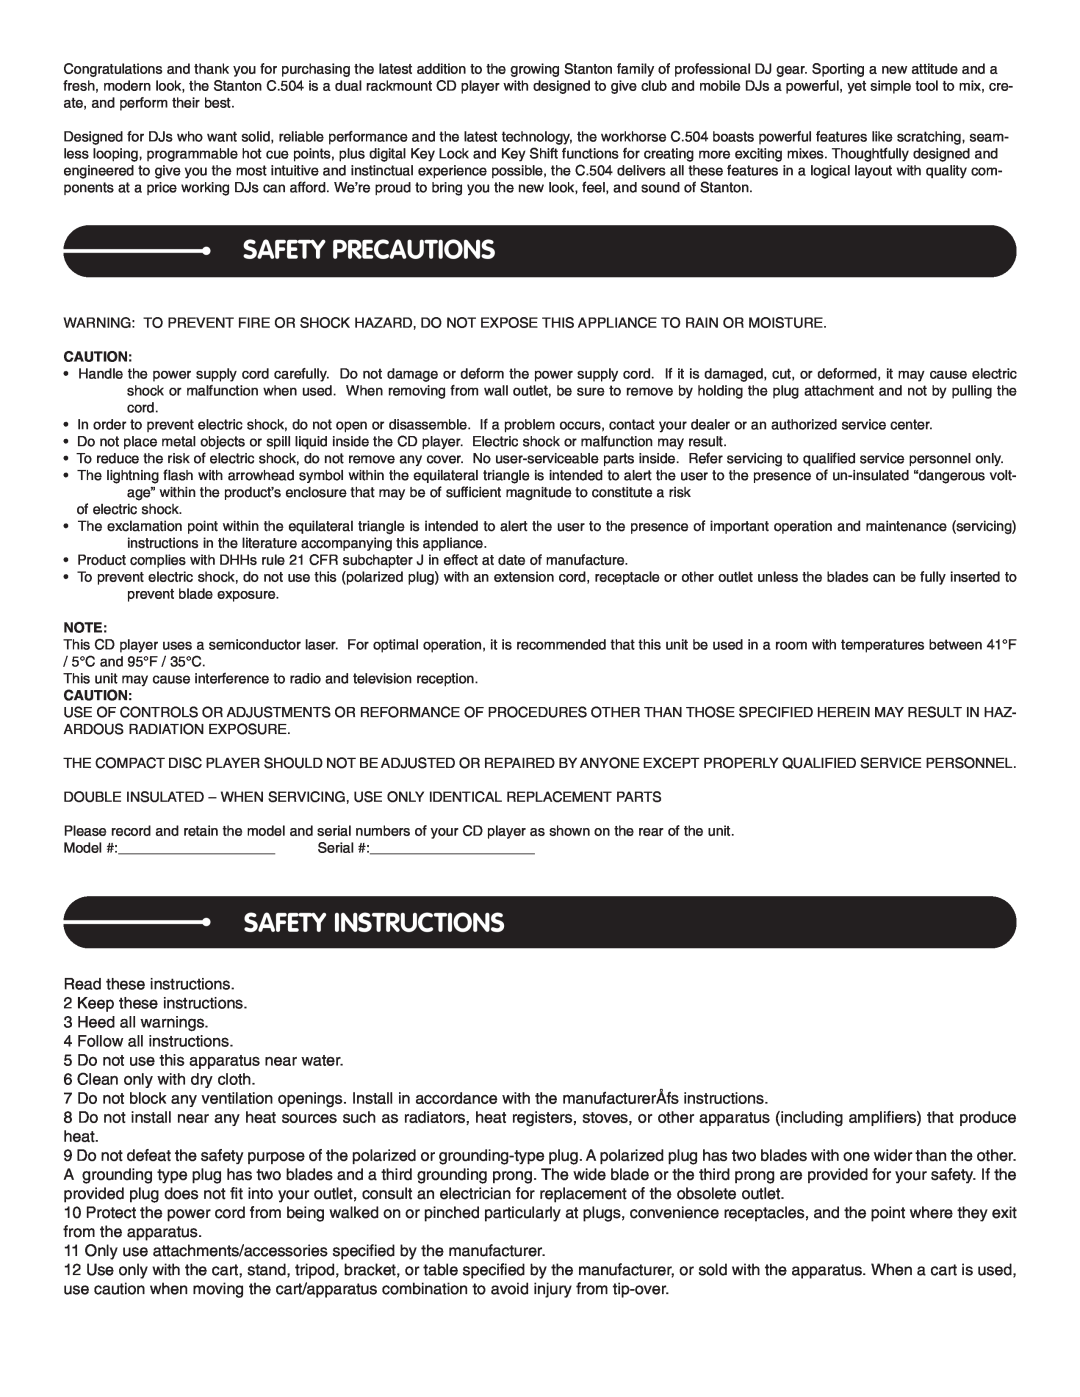 Stanton C.504 manual Safety Precautions, Safety Instructions 